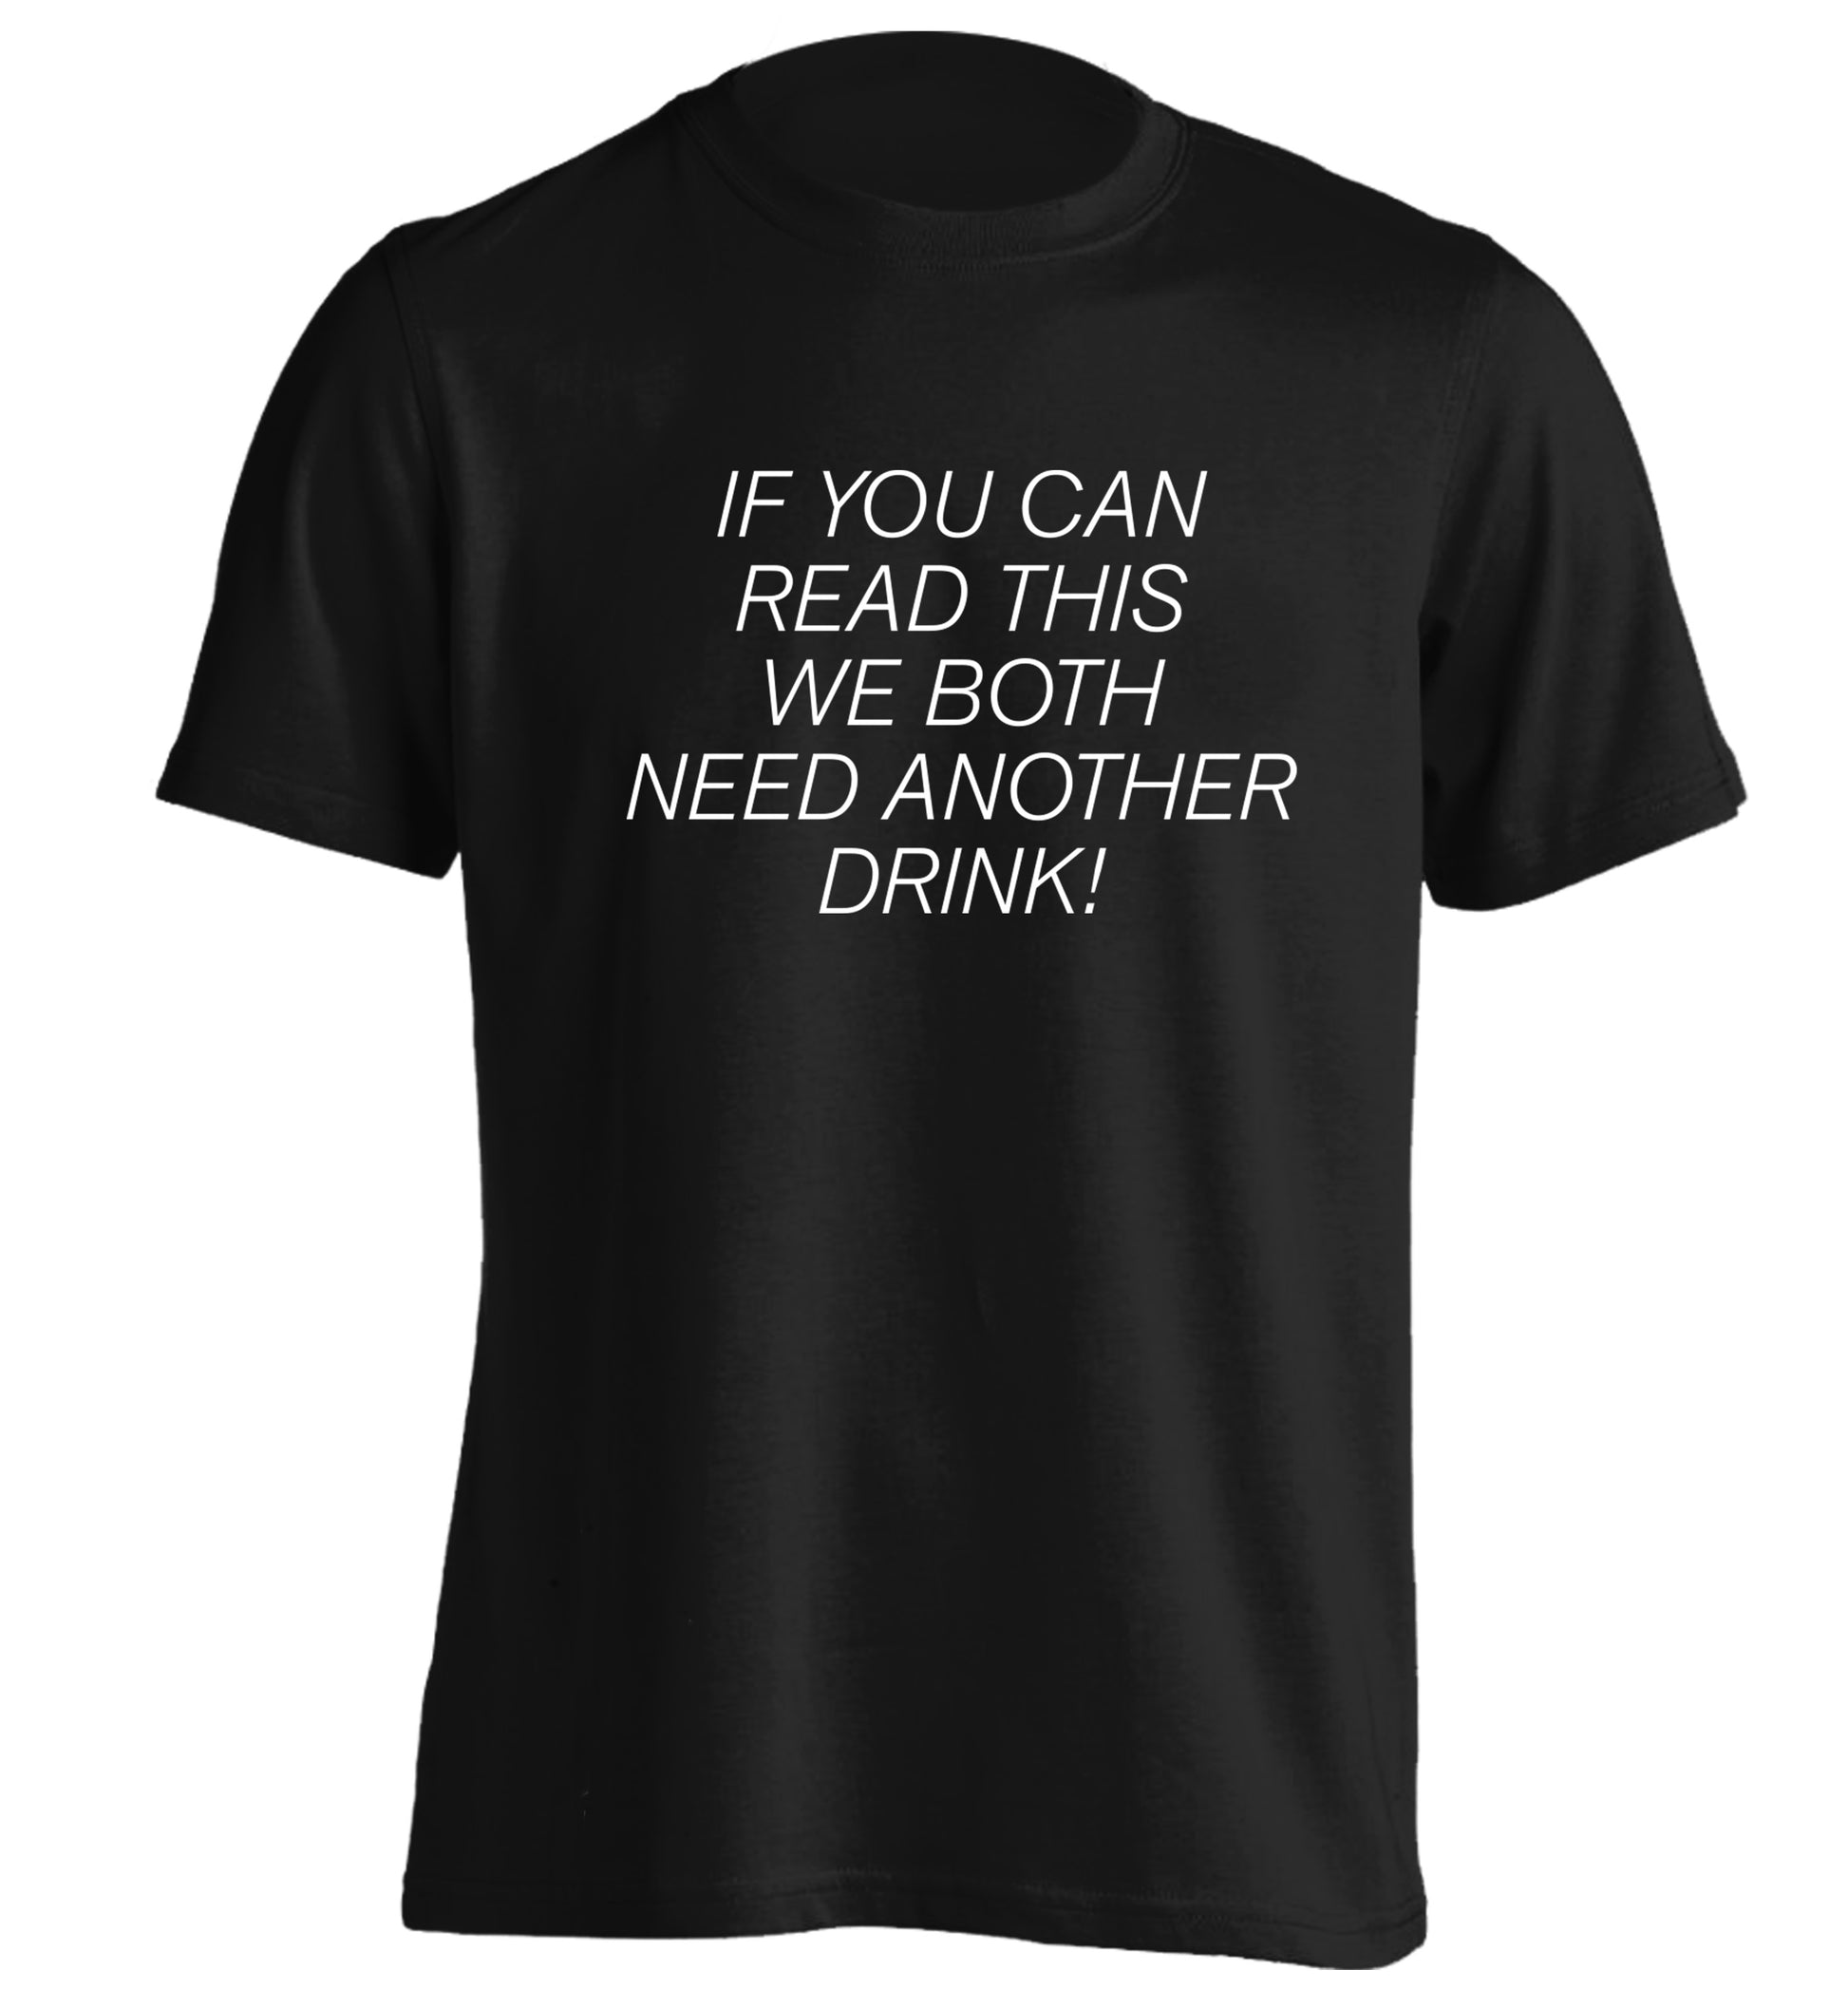 If you can read this we both need another drink! adults unisex black Tshirt 2XL